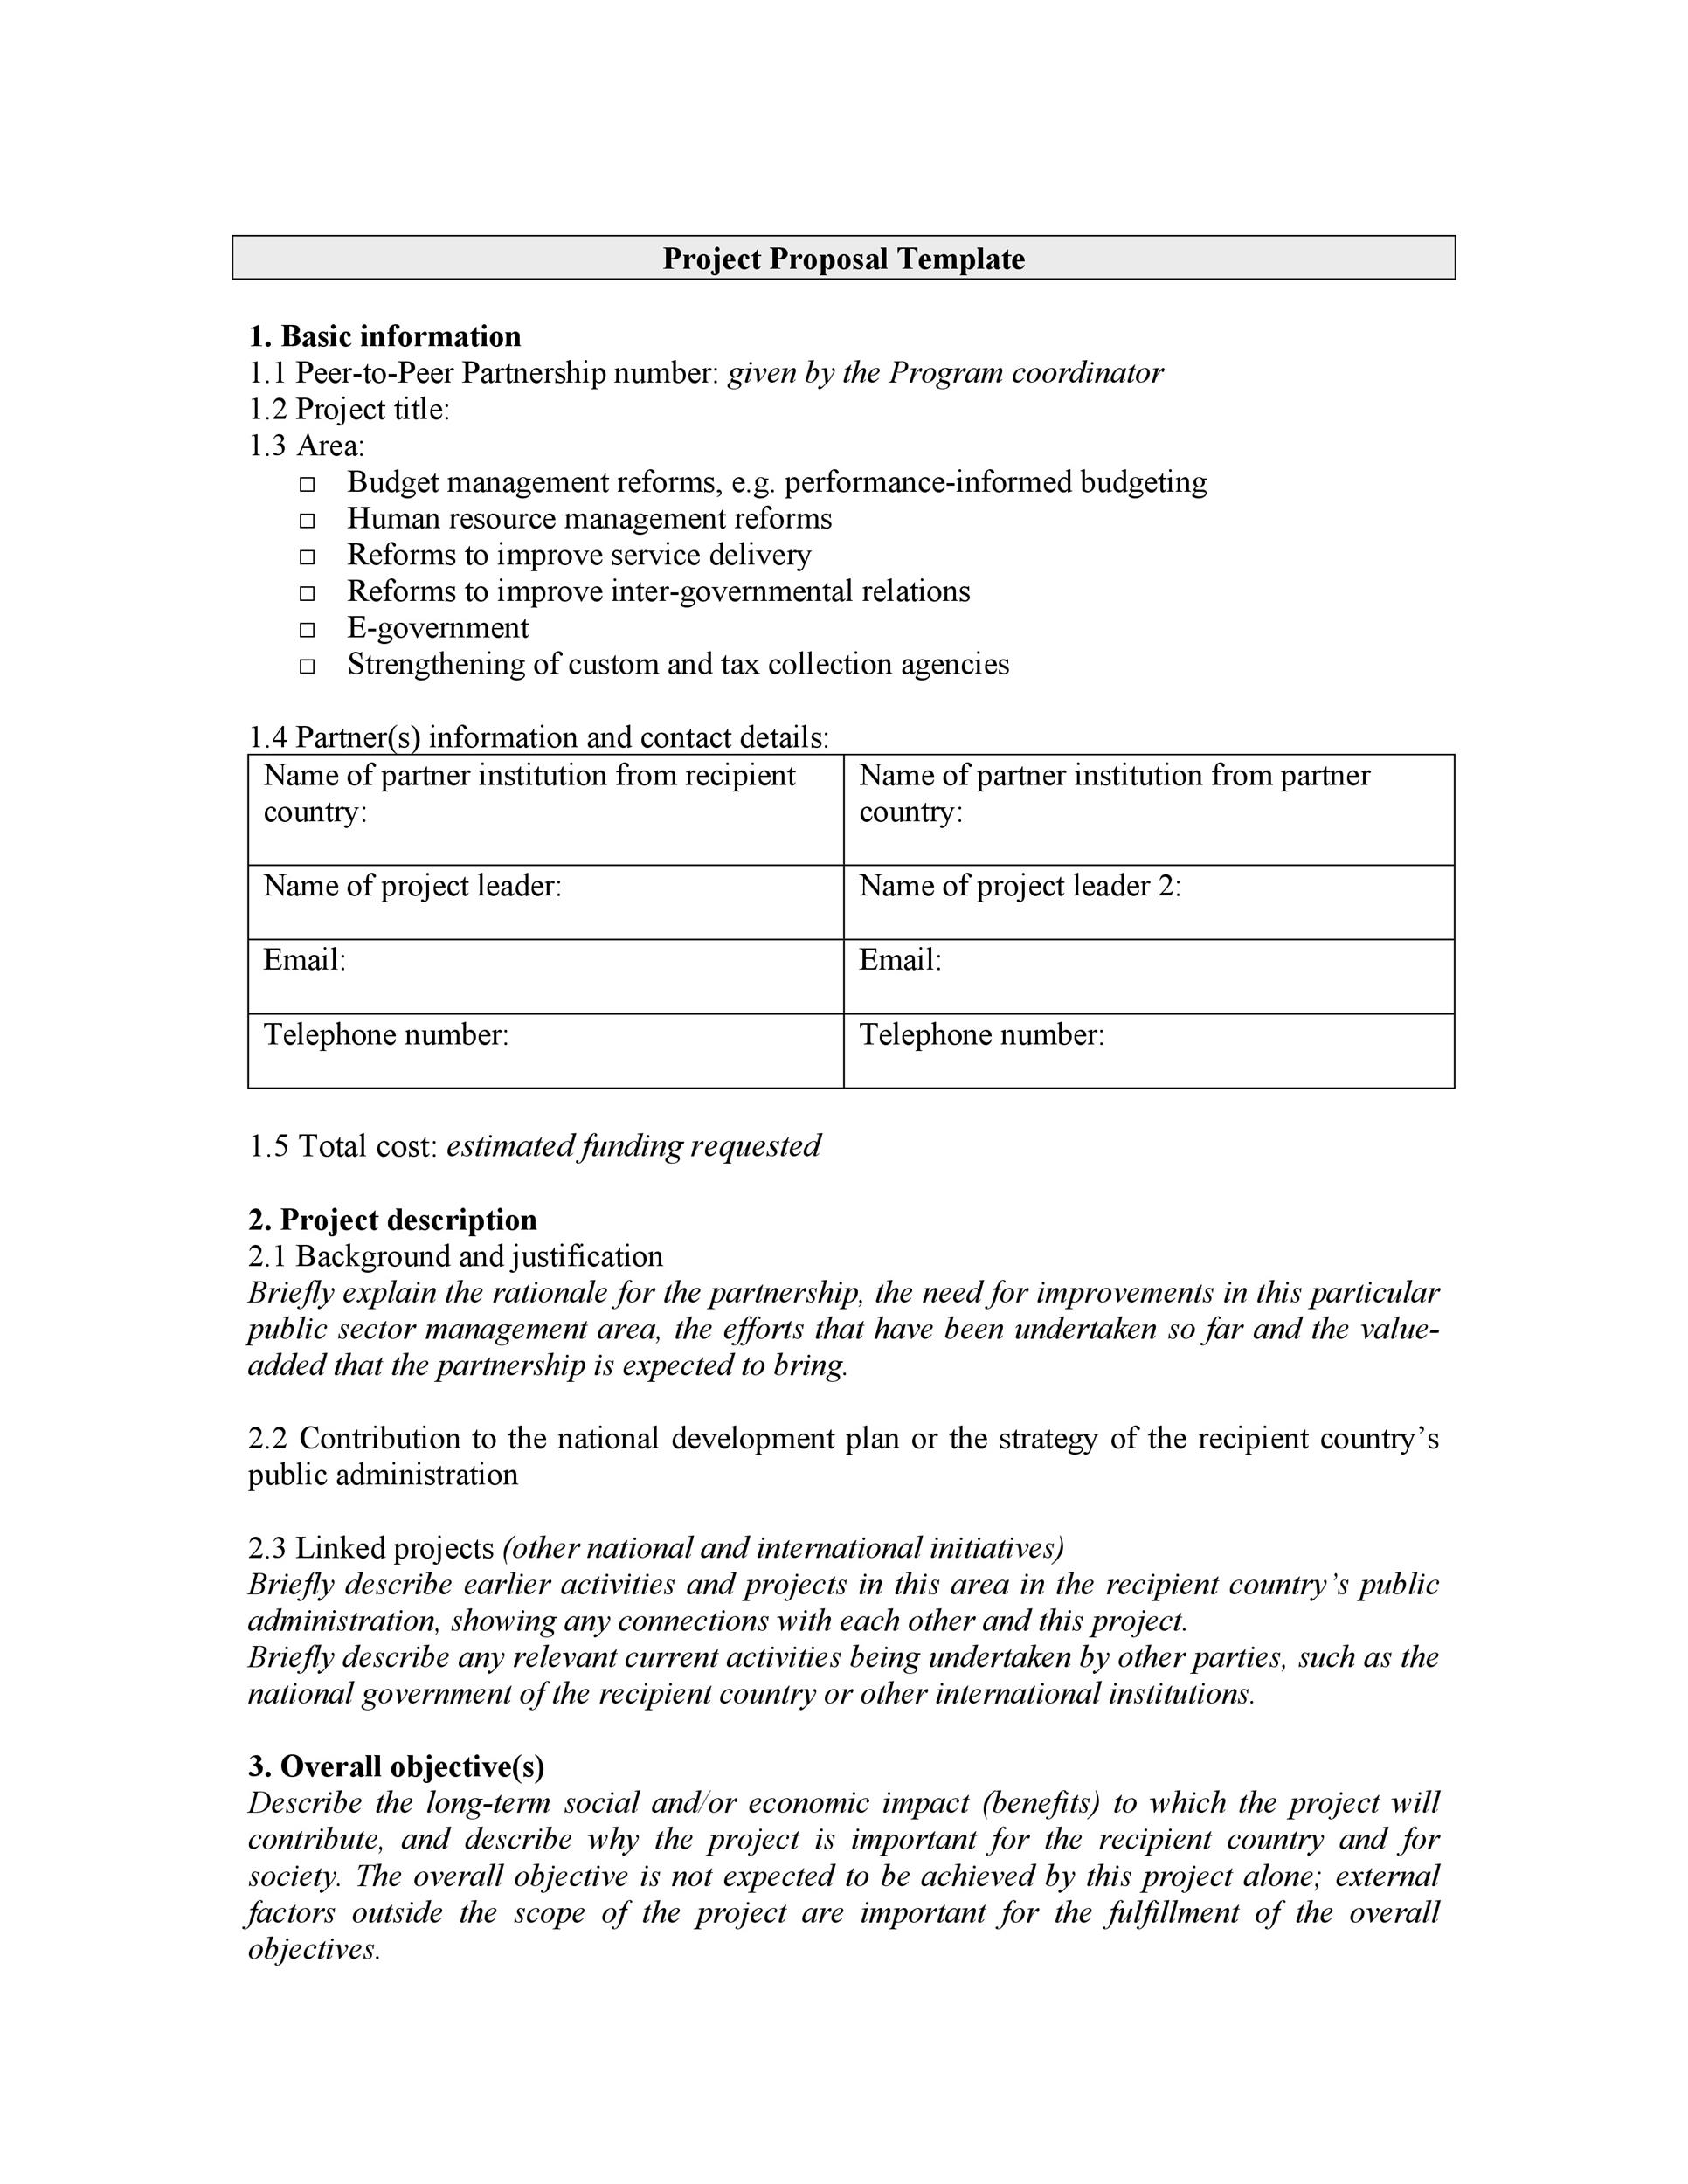 Project Proposal Template Doc For Your Needs